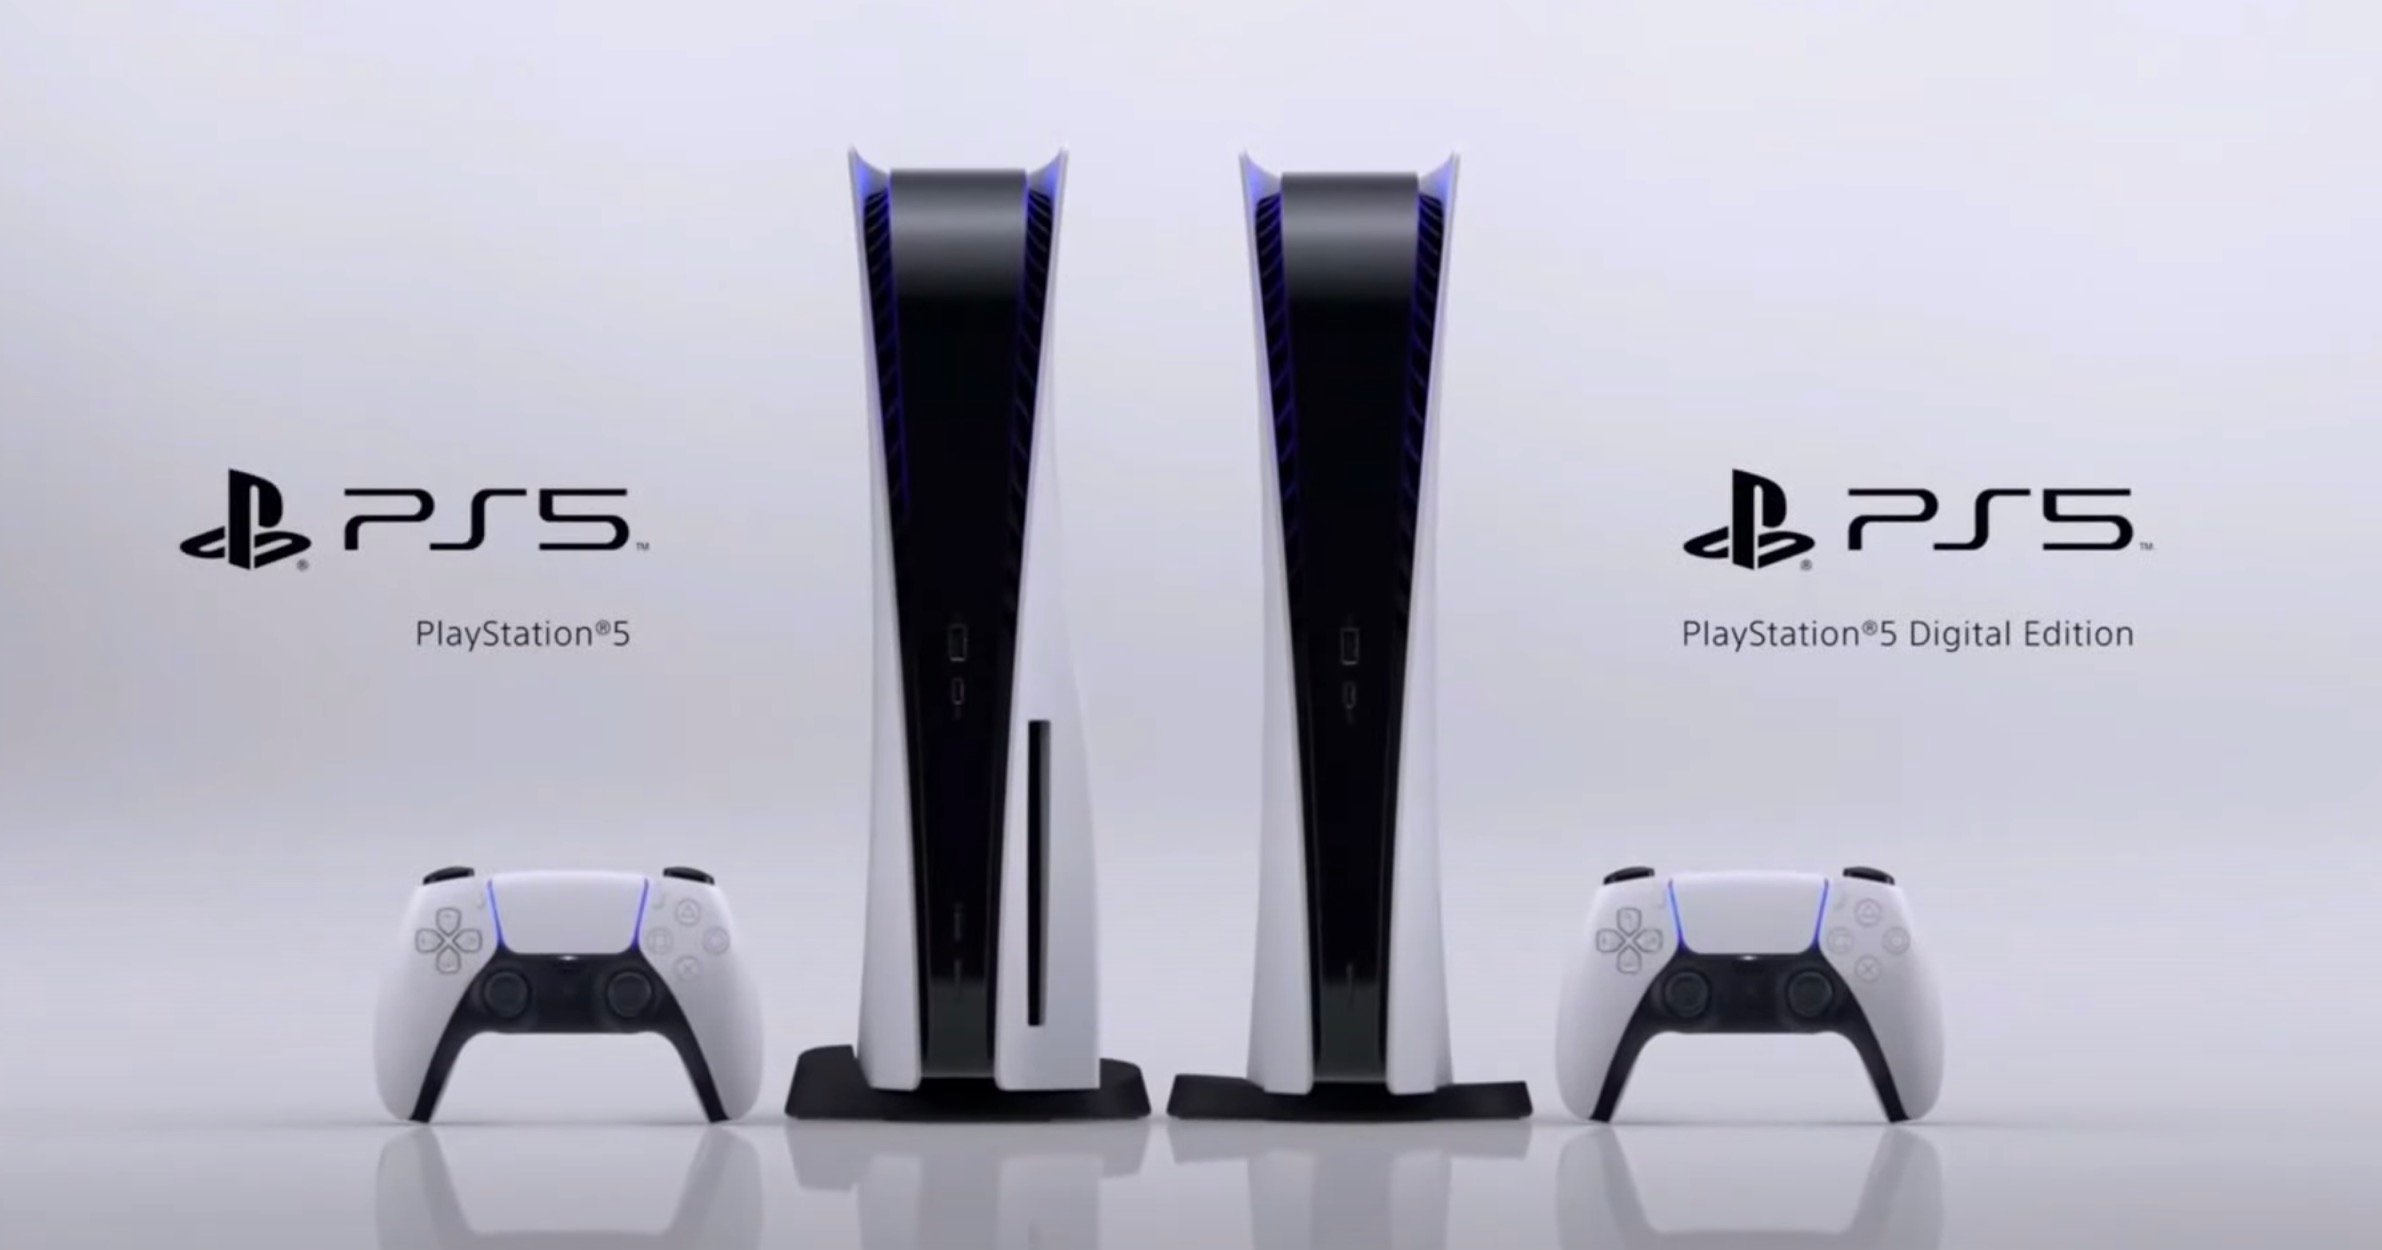 2 Reasons to Wait for the PS5 4 Reasons To Buy a PS4 Pro